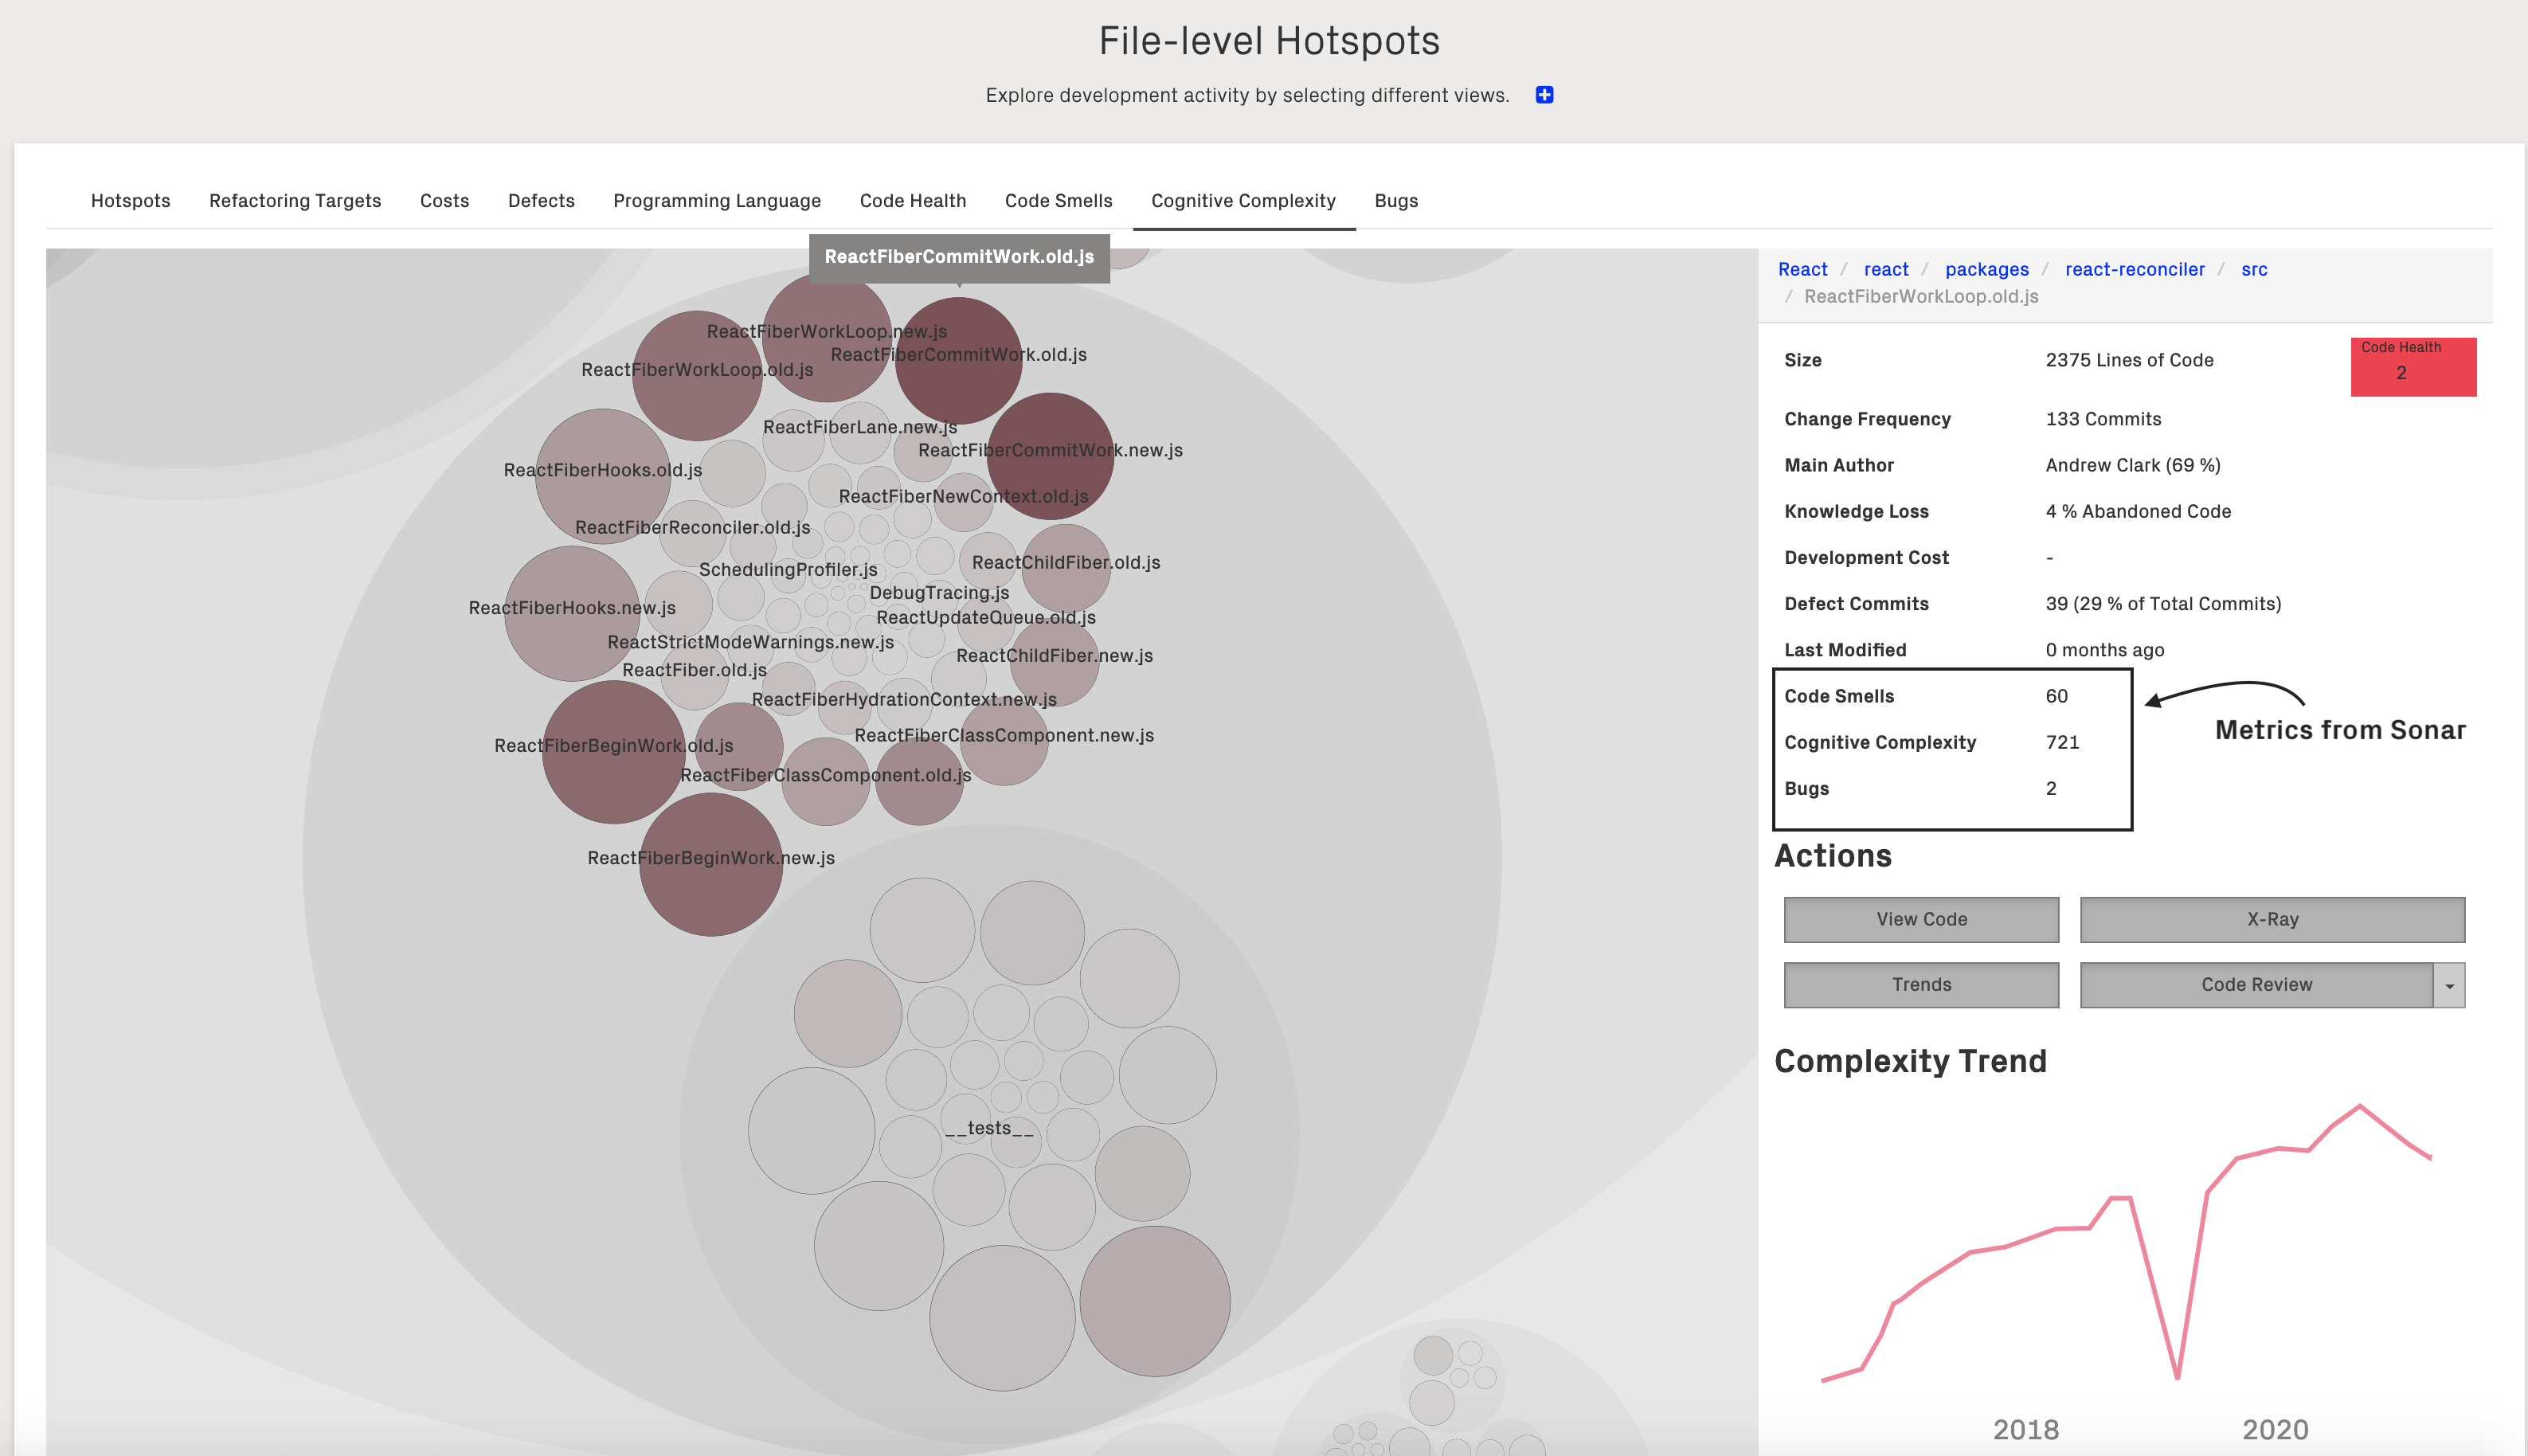 CodeScene integrates SonarQube metrics in its interactive views. Here's an example of visualizing Cognitive Complexity.